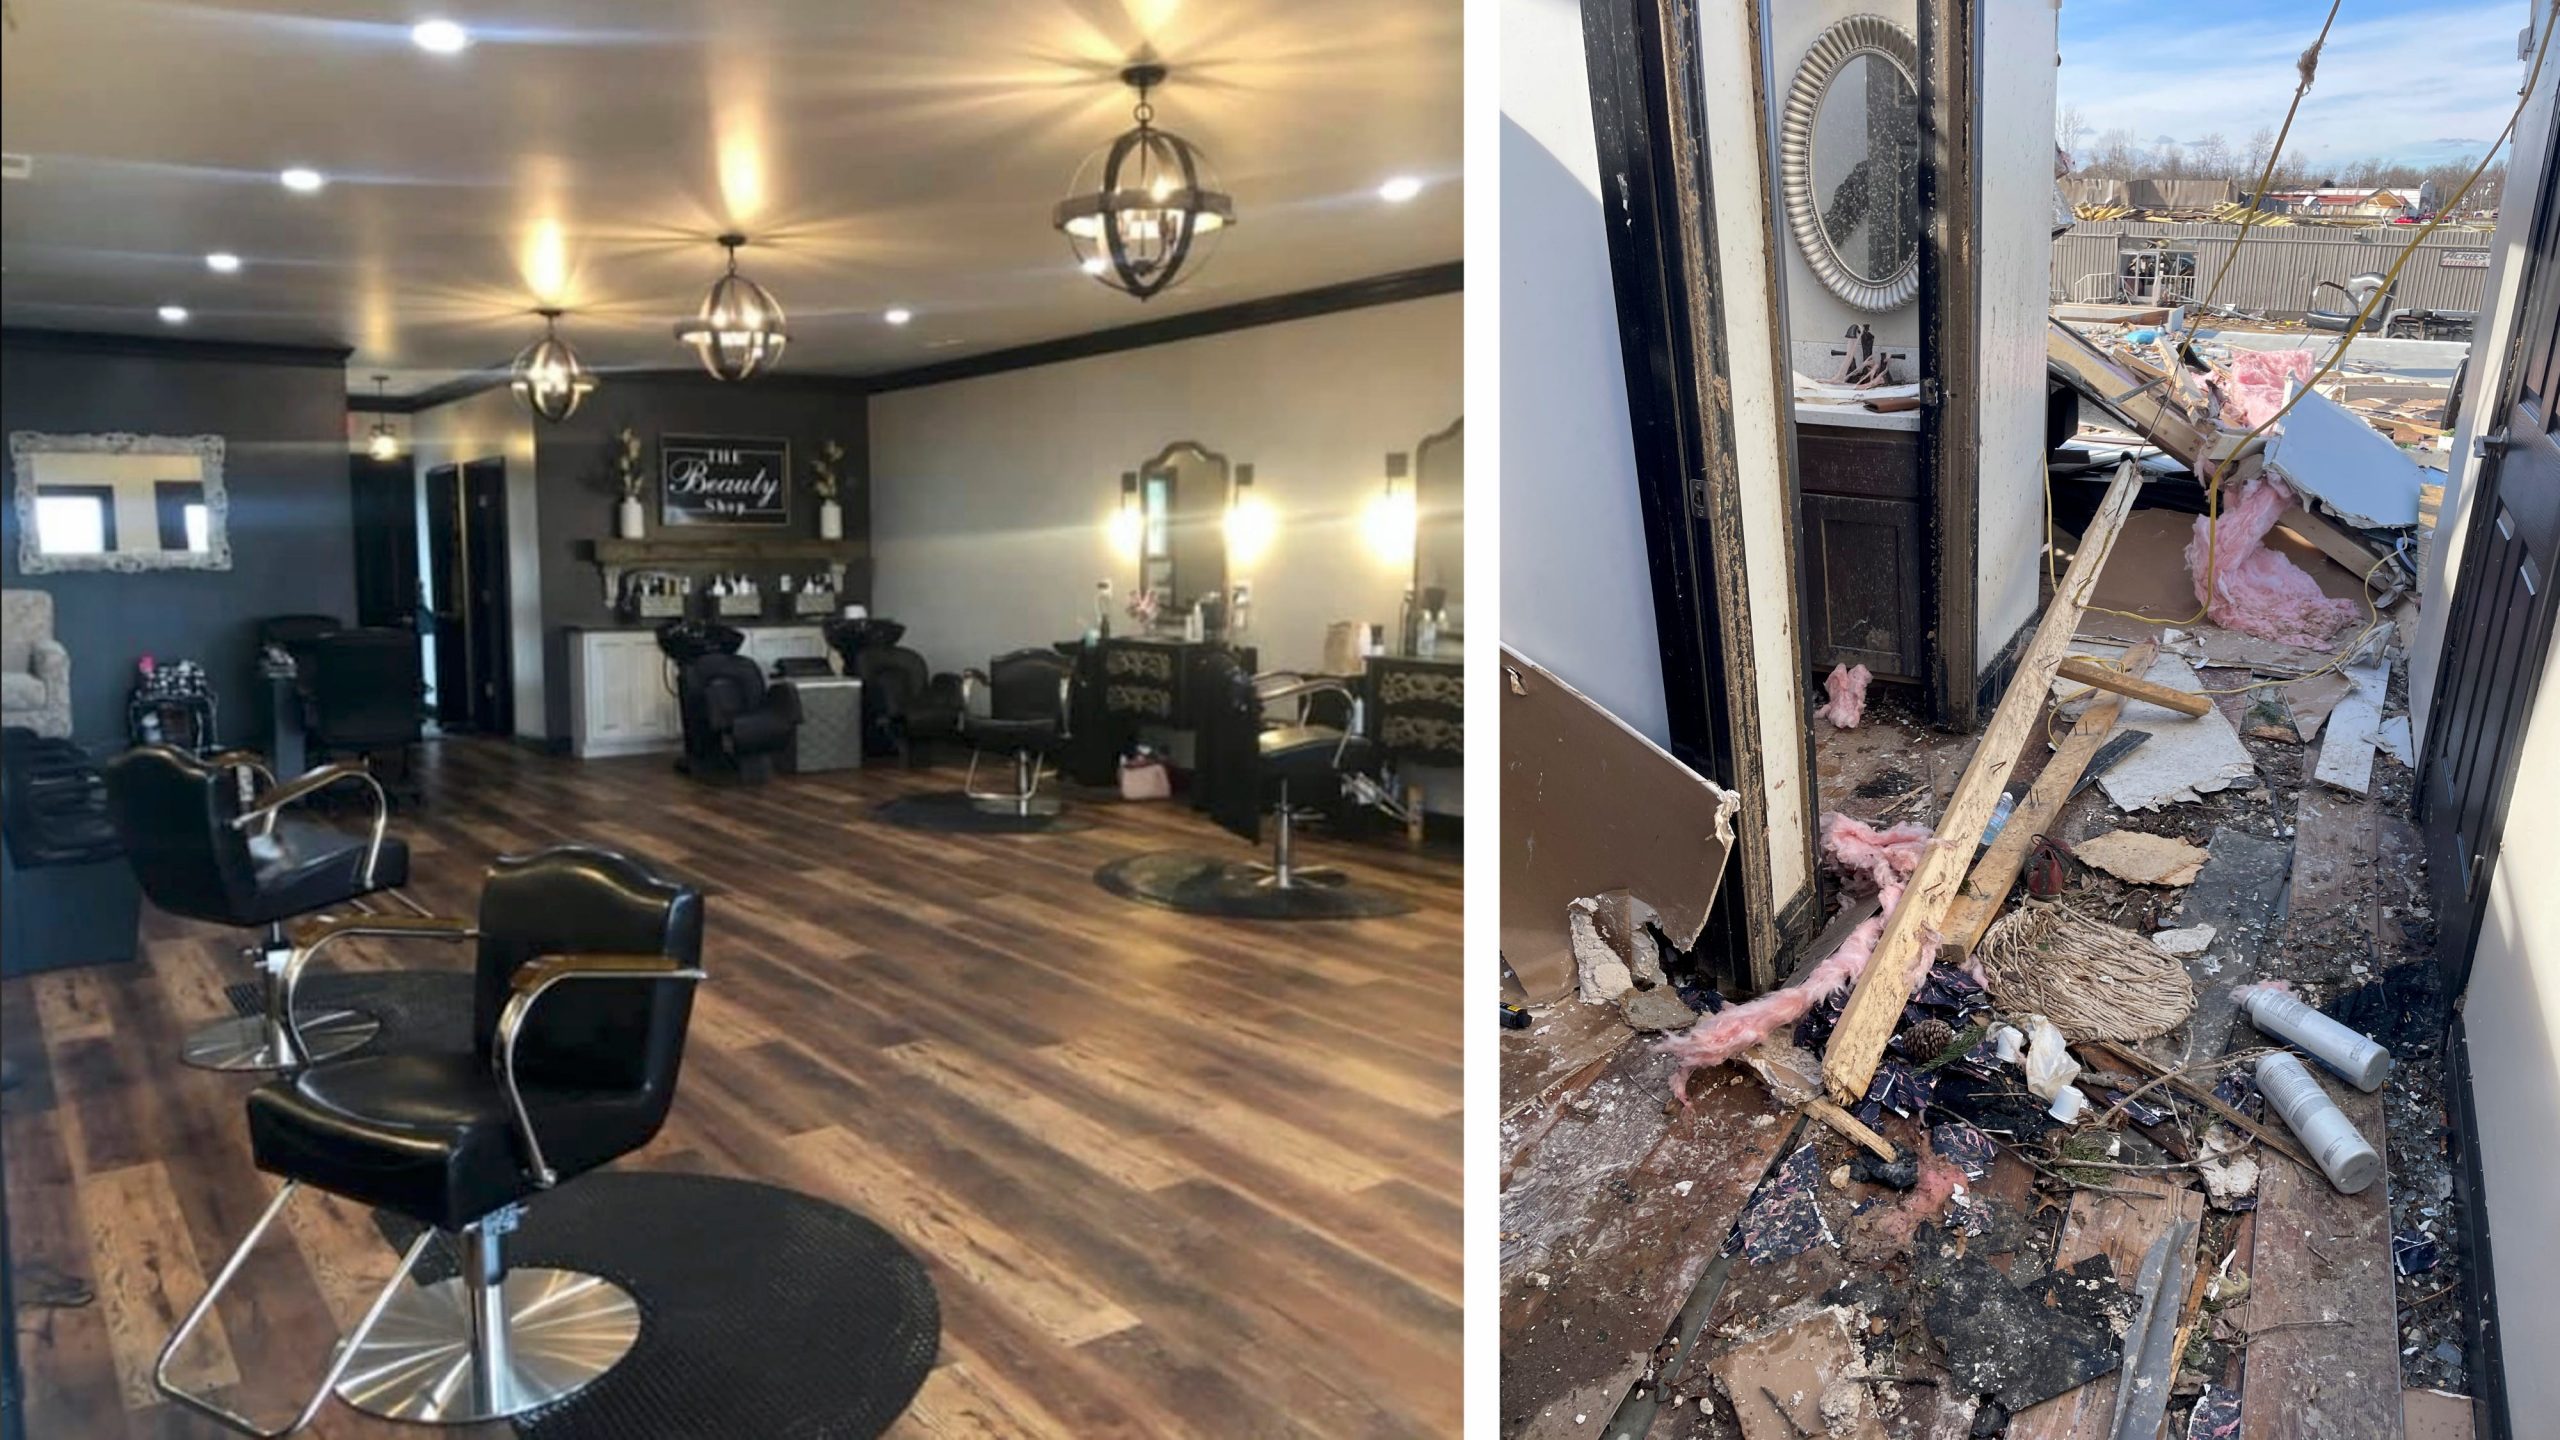 The Beauty Shop before and after a tornado hit it.